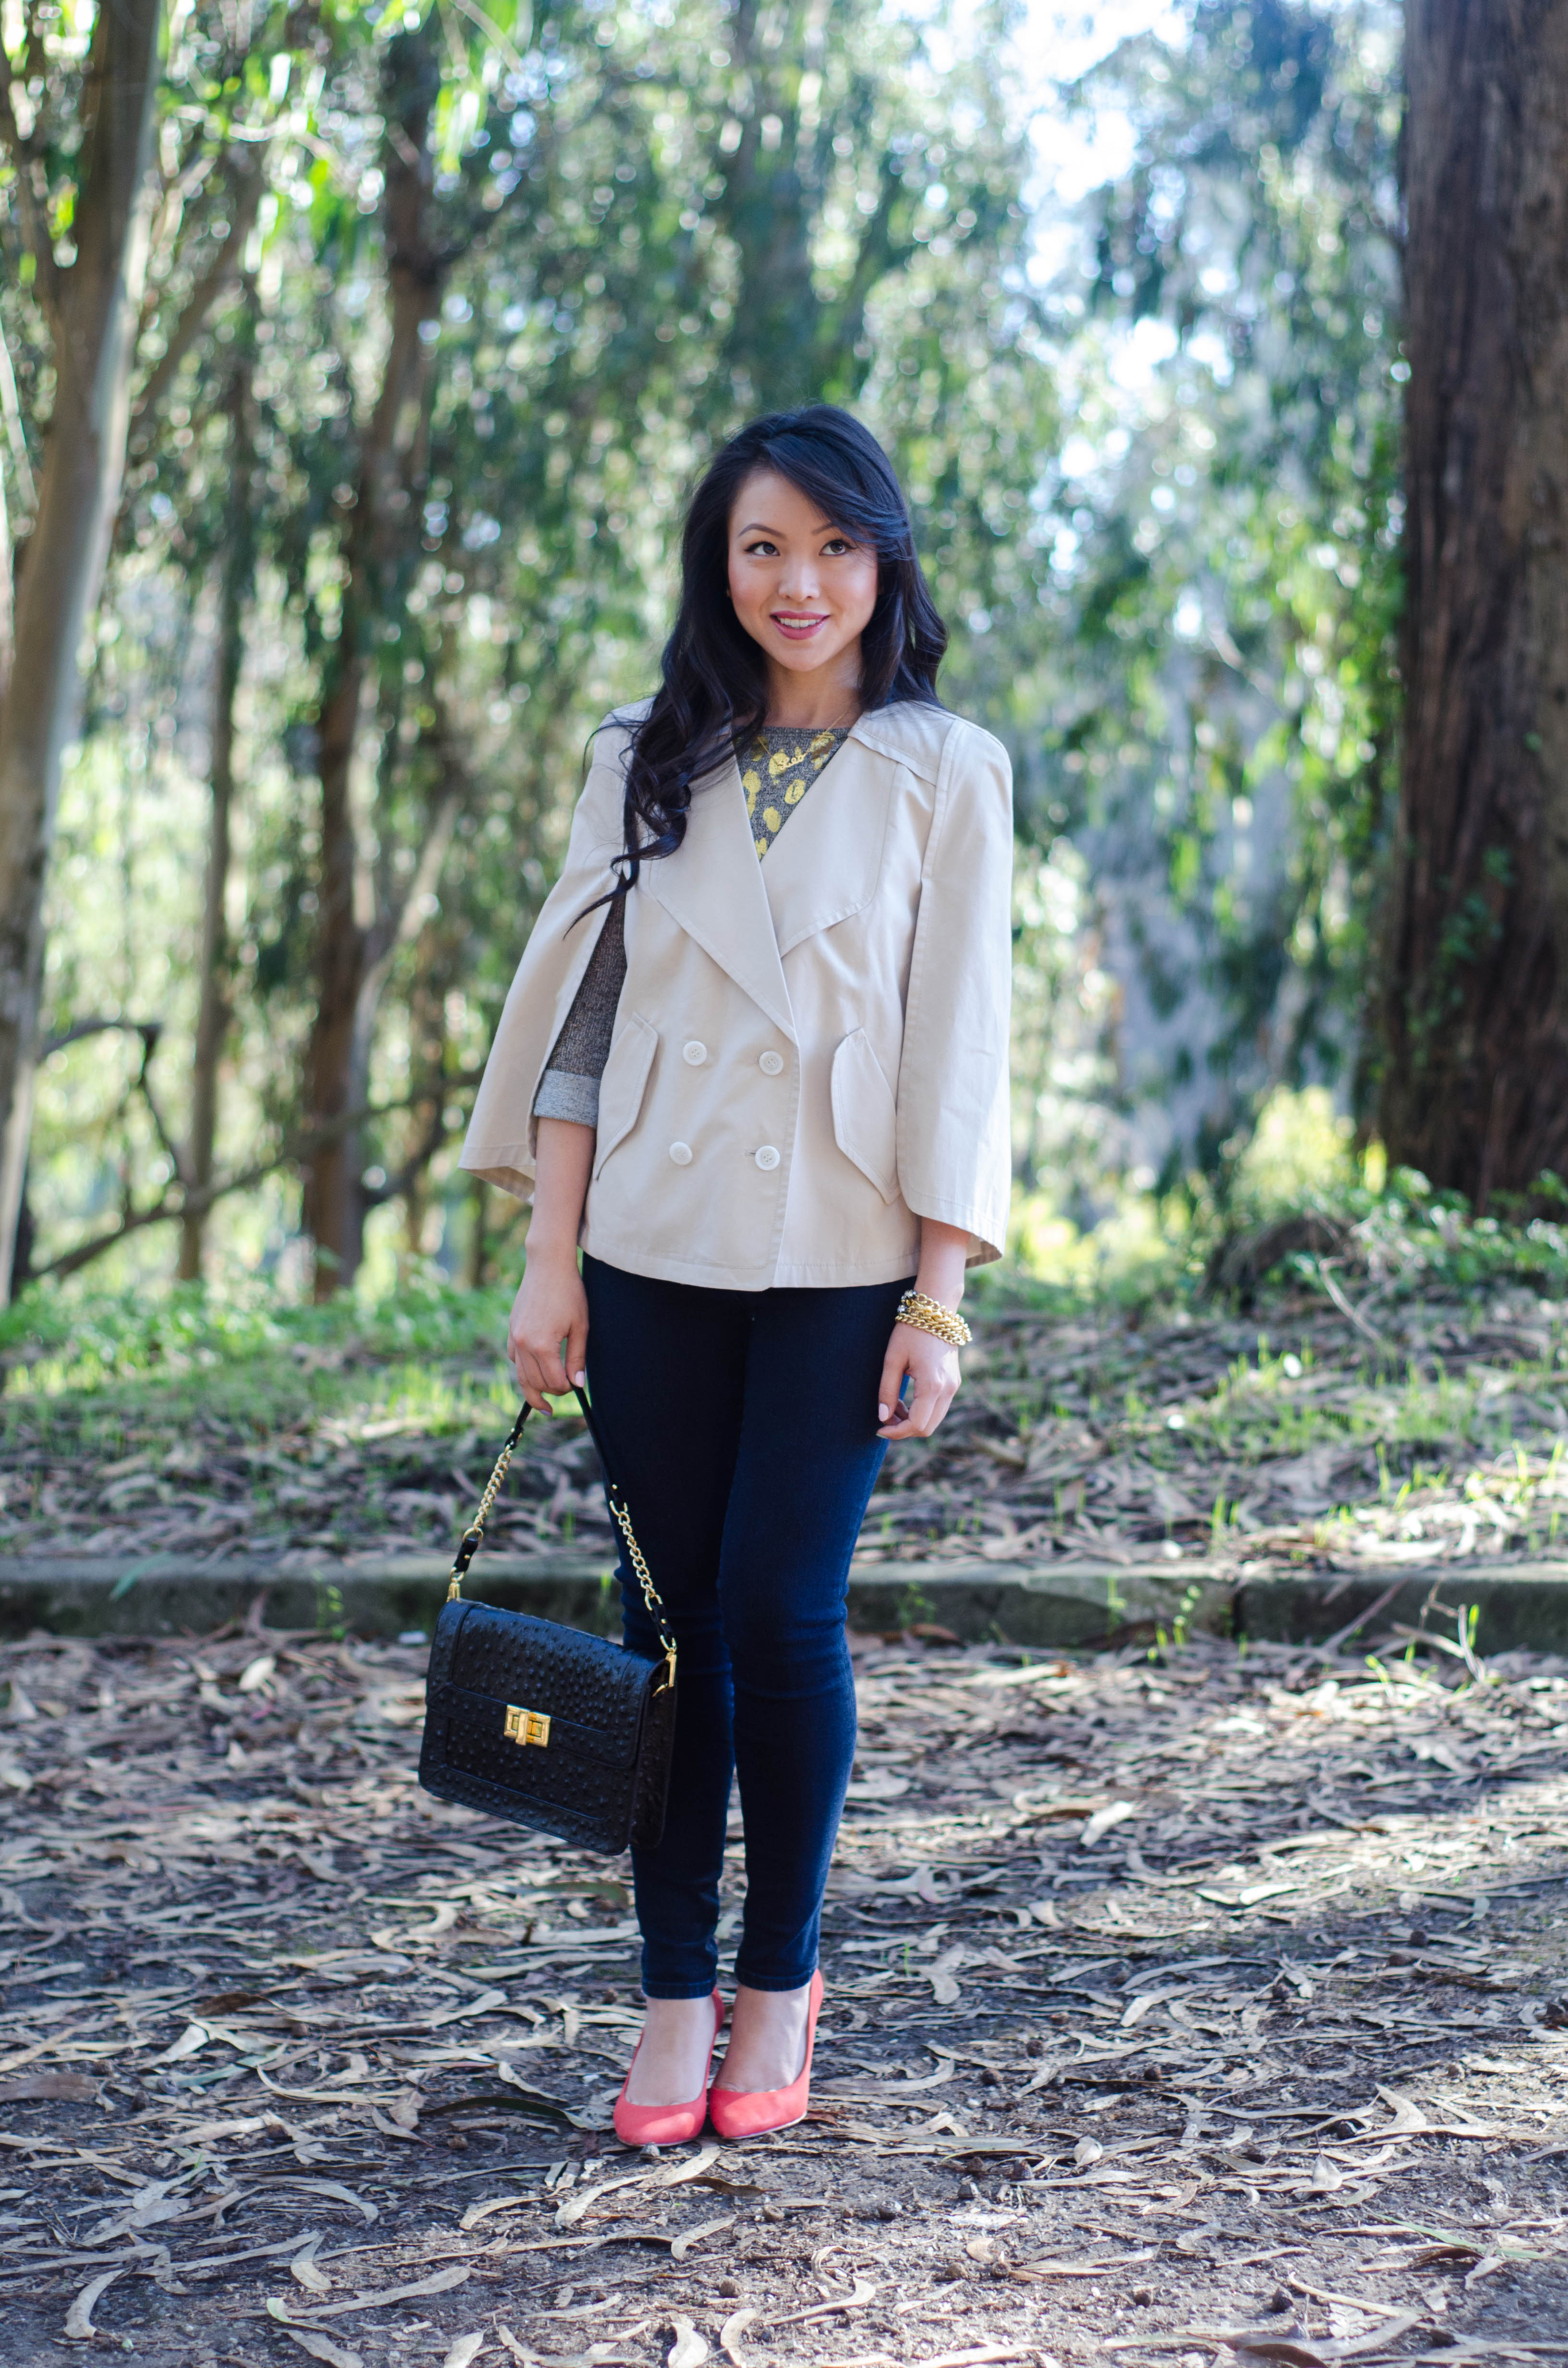 #OOTD: Great esCape - The Fancy Pants Report | San Francisco Fashion Blog